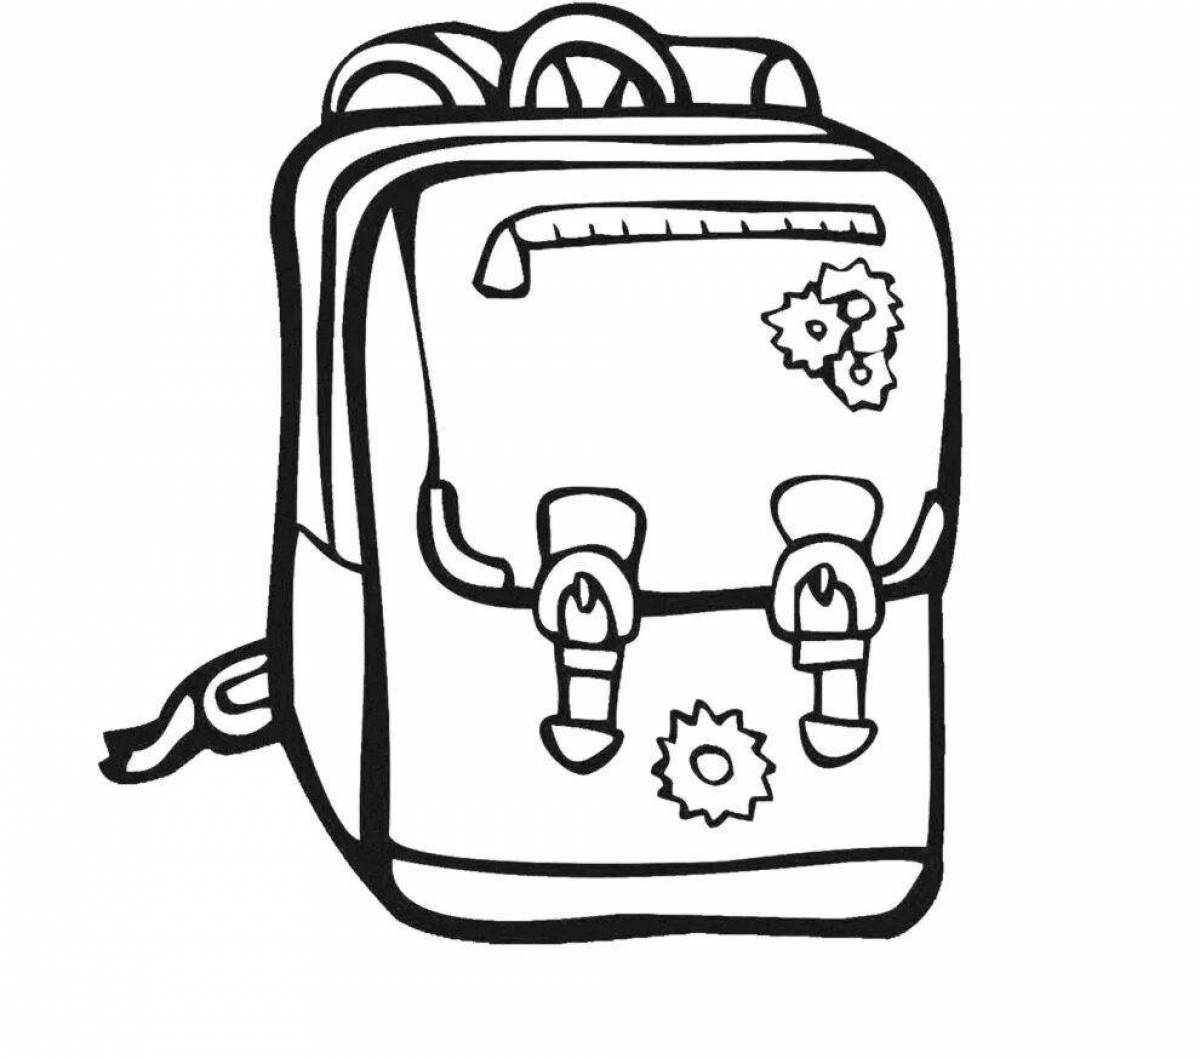 Coloring page fashionable school bag